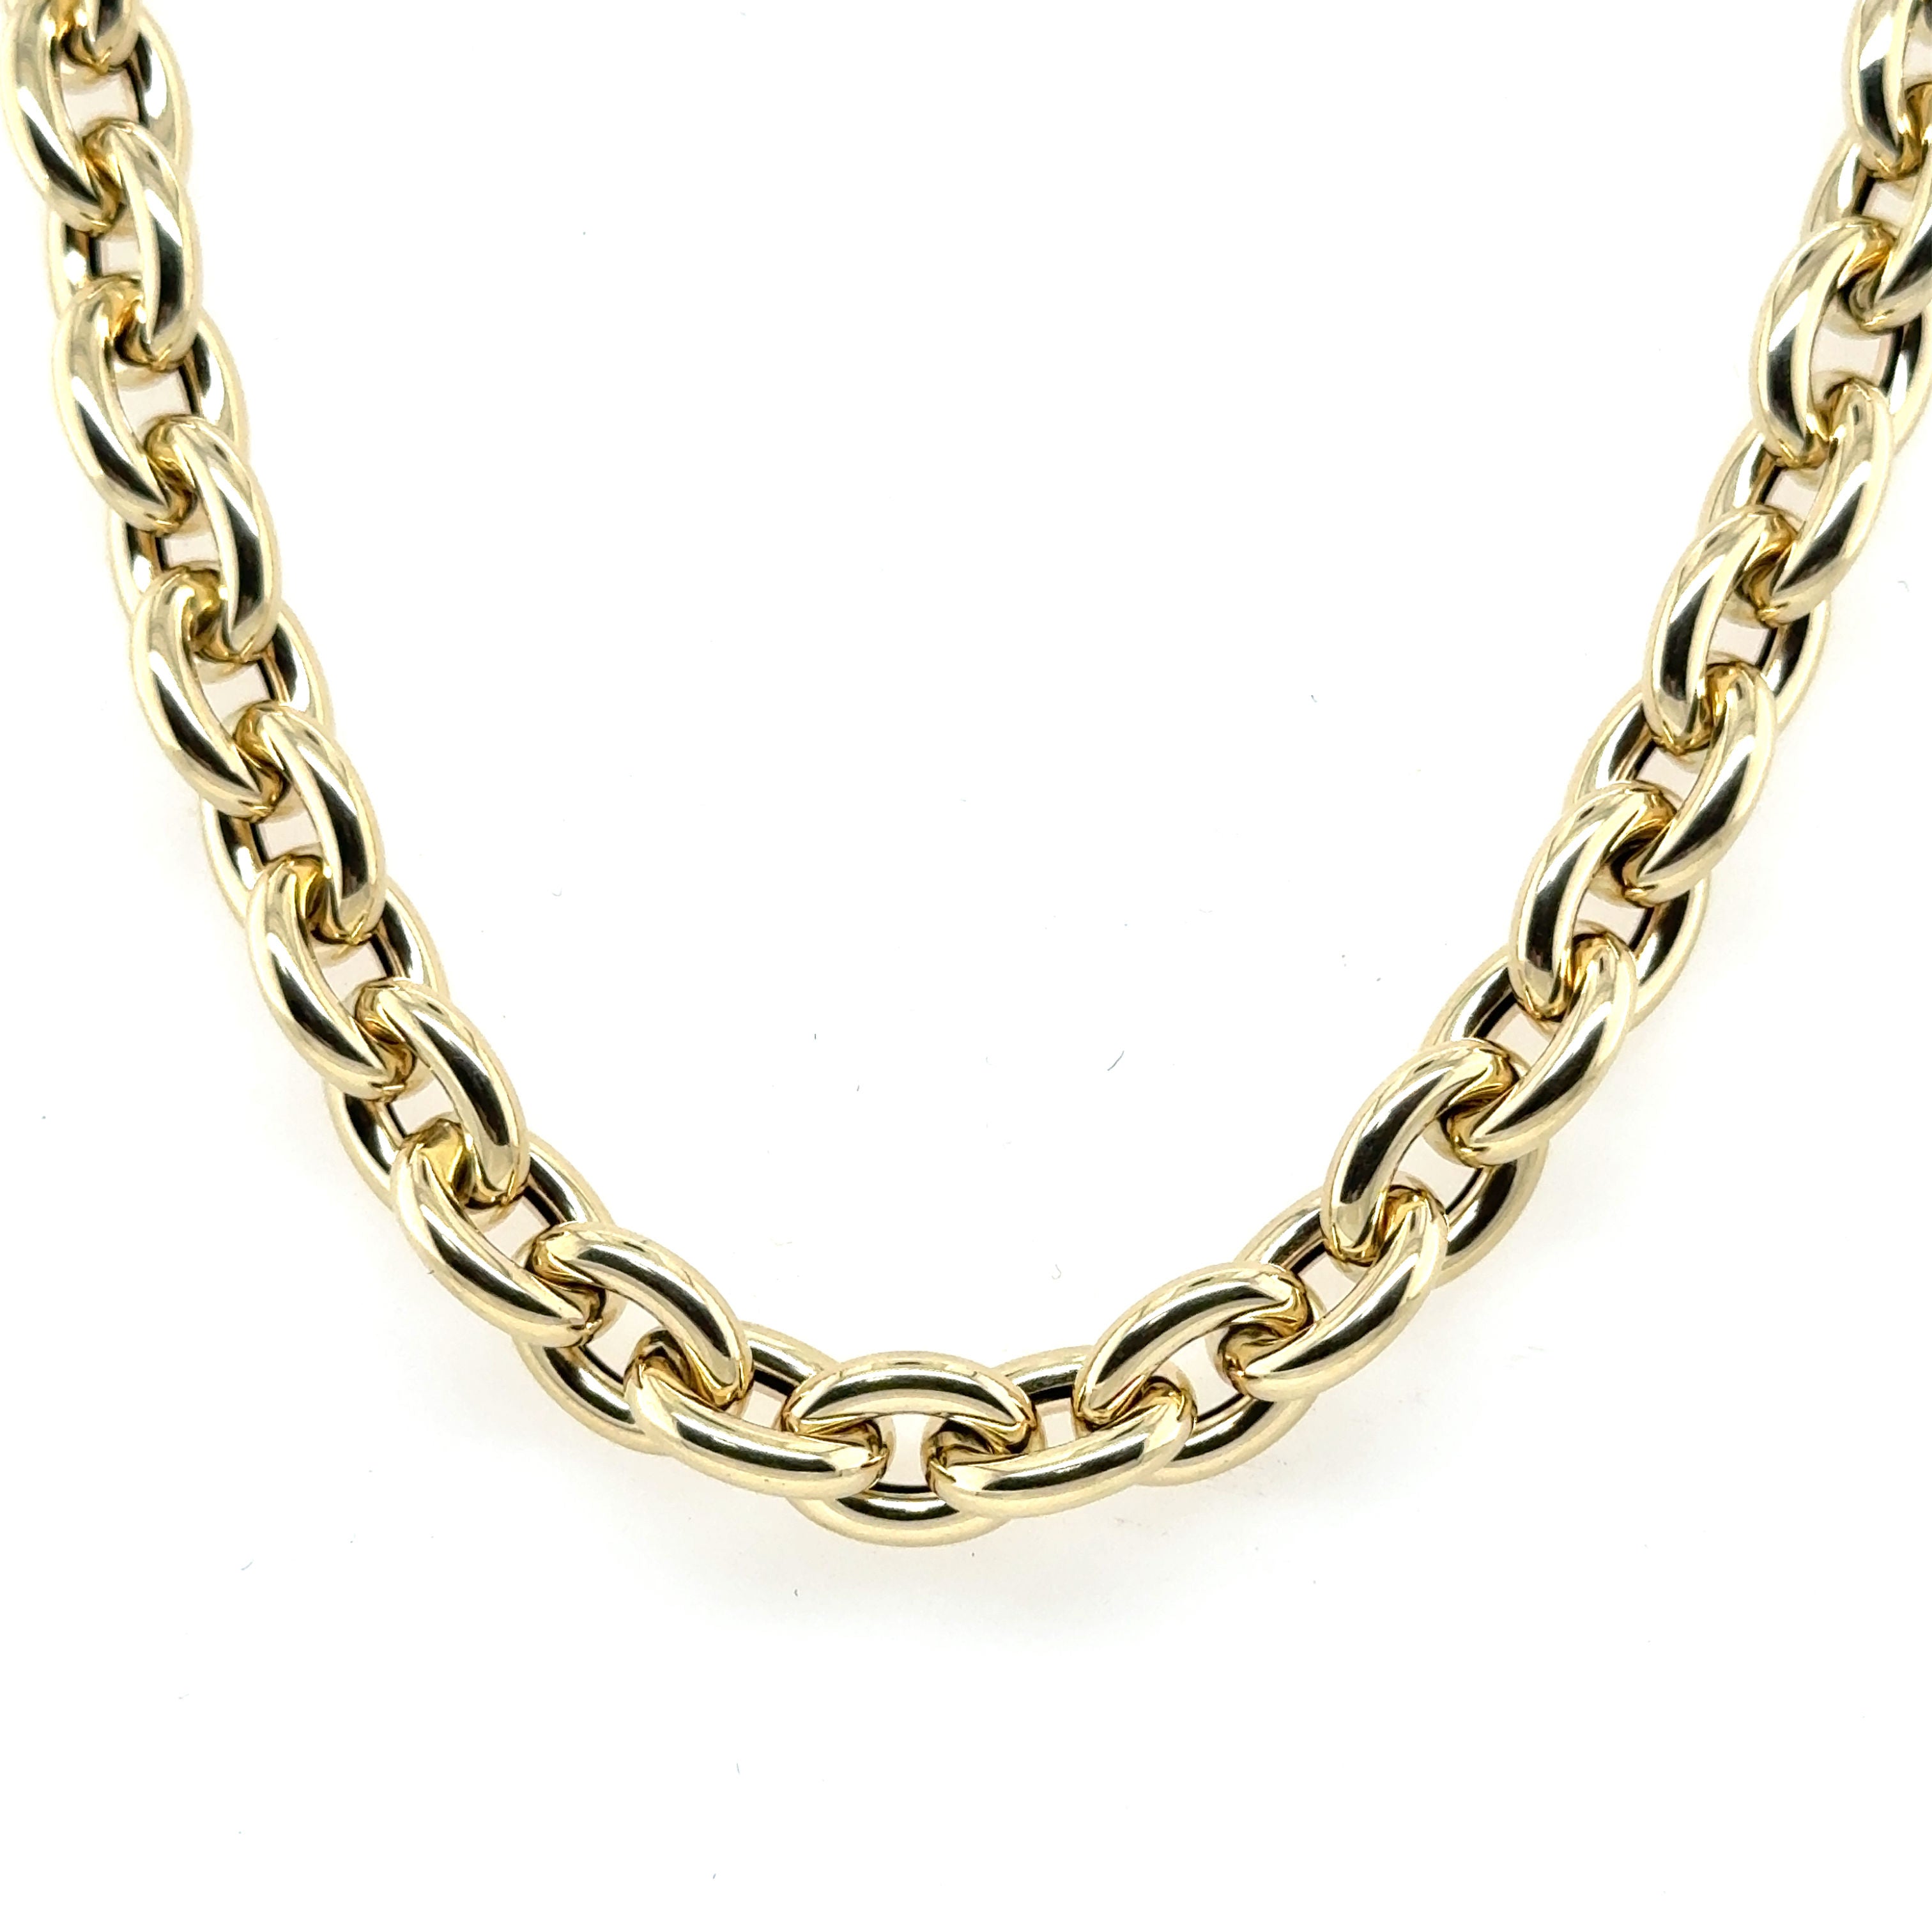 14K YELLOW GOLD THICK ROLO NECKLACE ROUND LINK WOMEN